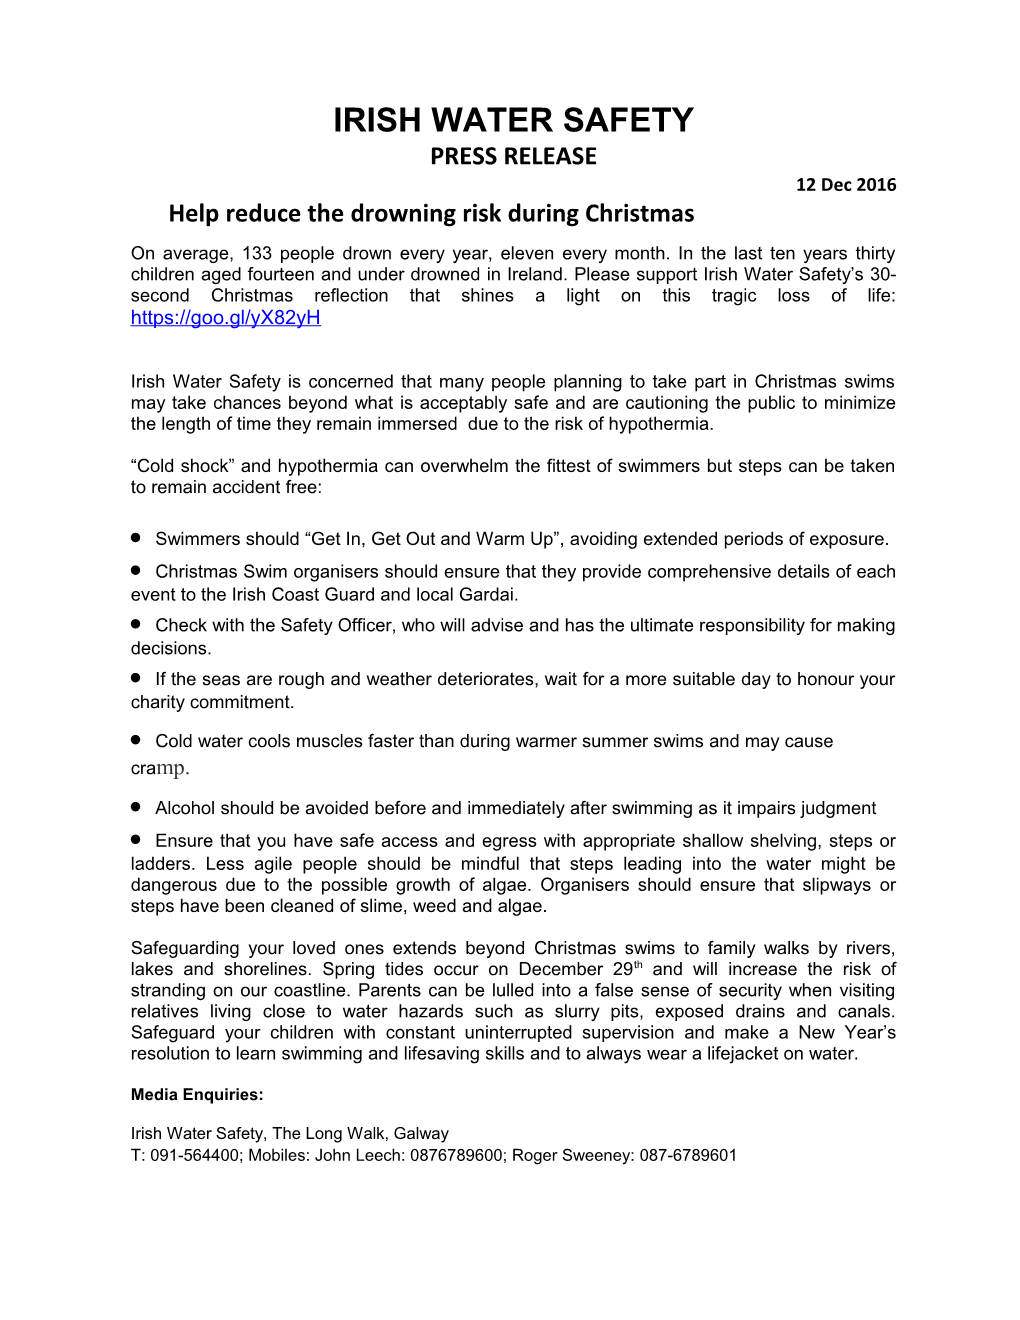 Help Reduce the Drowning Risk During Christmas